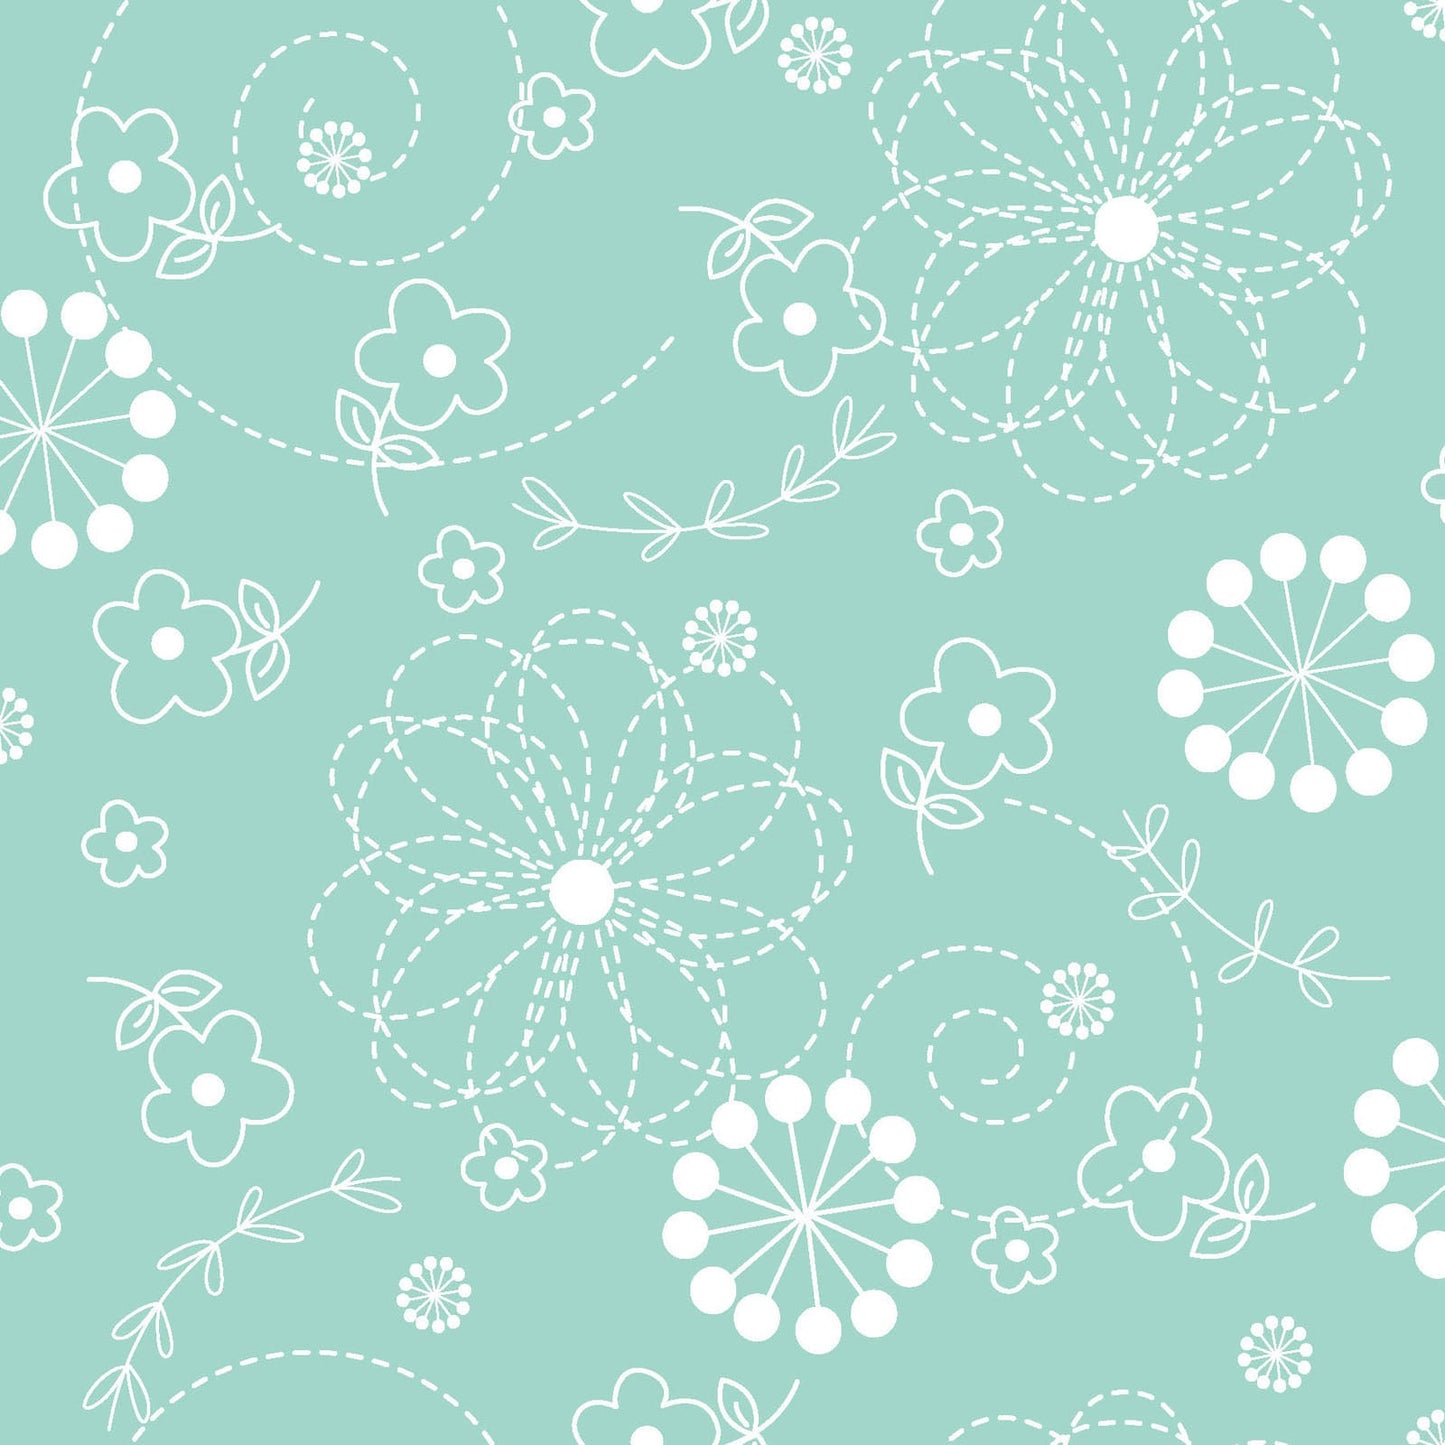 White on Aqua Doodles is part of the Kimberbell Basics line designed by Kim Christopherson for Maywood Studio. This fabric features white, Pin-stitched flowers and dandelion bursts on an aqua background.